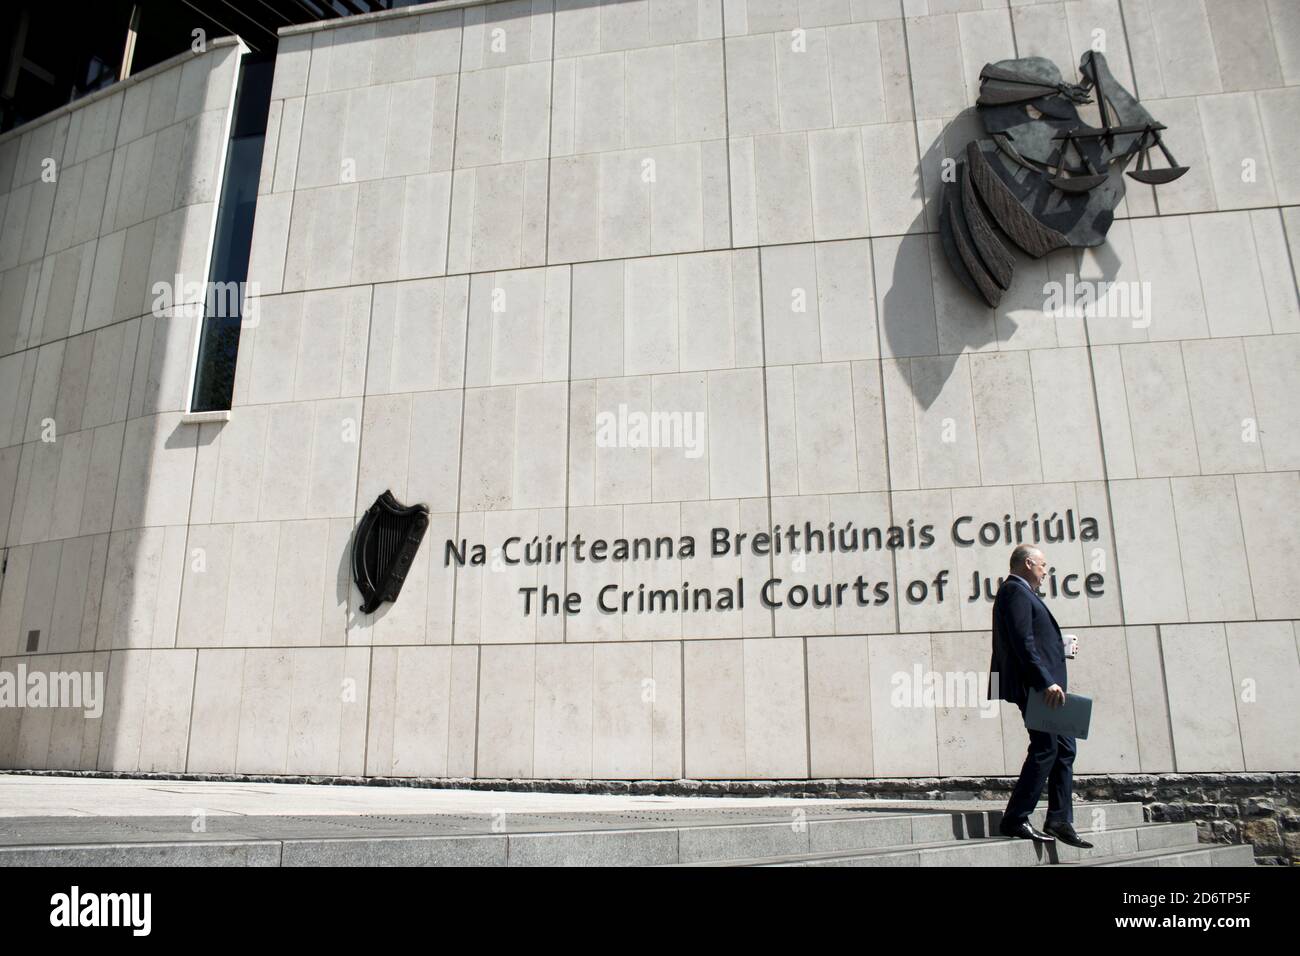 DUBLIN, IRELAND - Oct 13, 2017: An unidentified man walking down the stairs of The criminal courts of justice, Dublin, Ireland. Also known as Dublin's Stock Photo